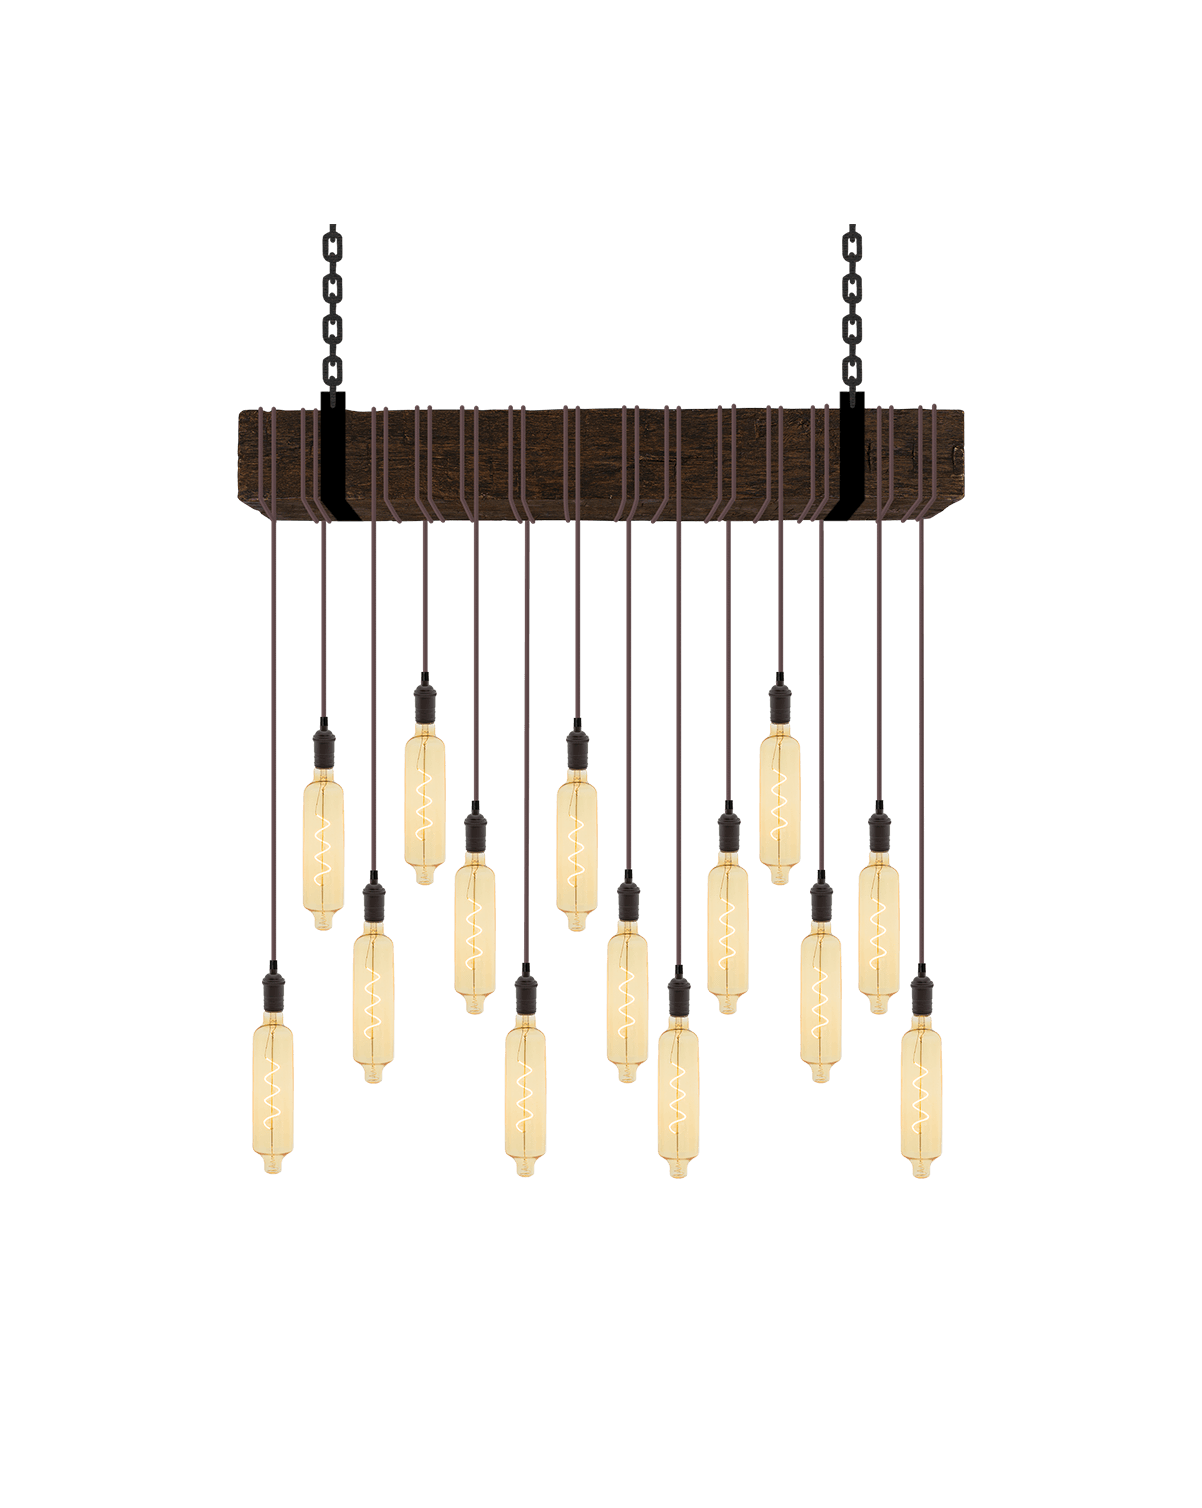 Faux Beam 14 Pendant Wrap: Taupe with XL Tube Bulbs Hangout Lighting 4' Beam